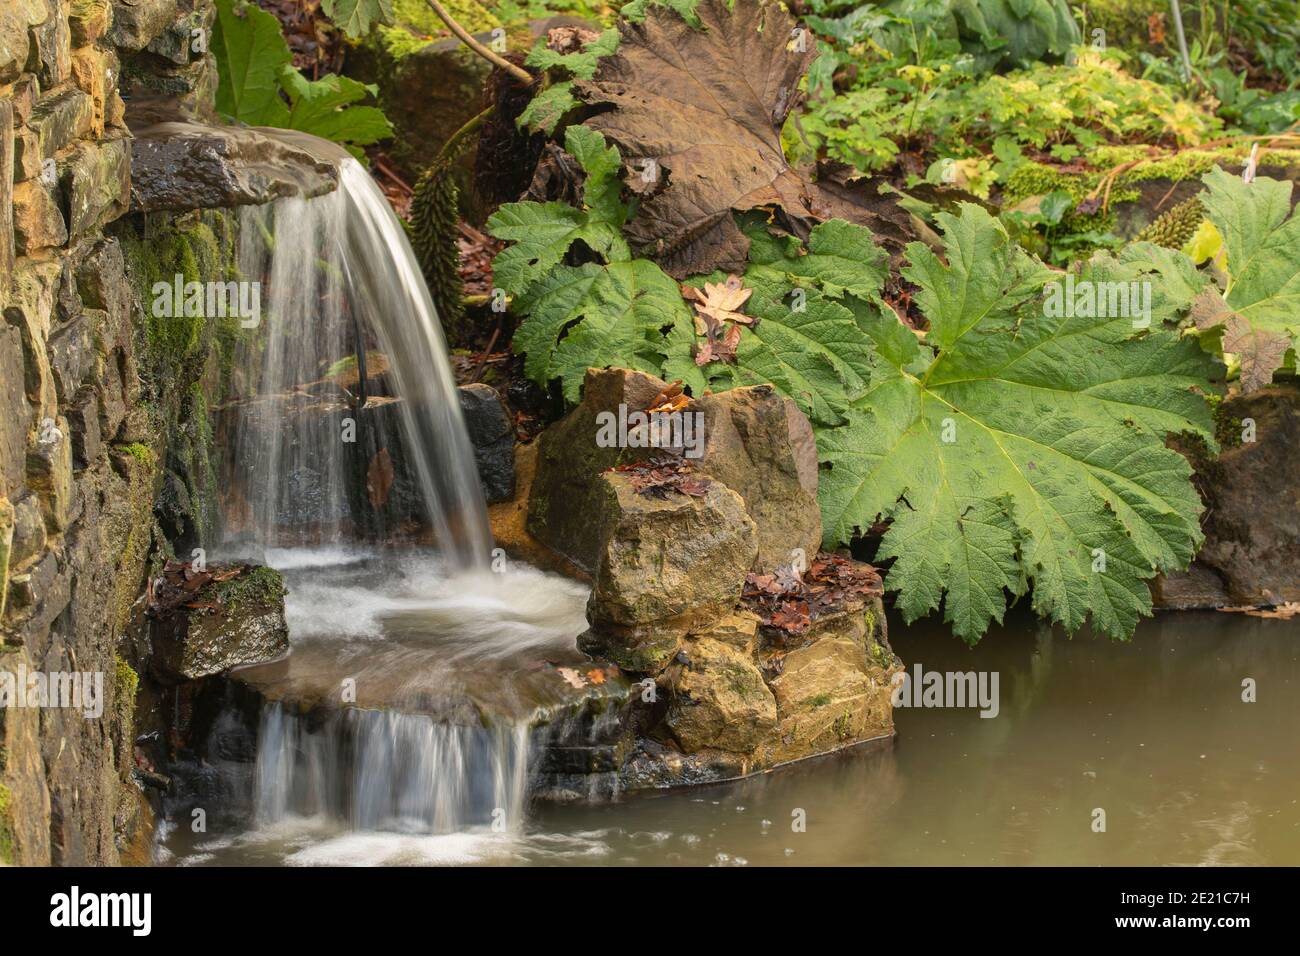 Gunnera plant and small waterfall, natural garden intimate landscape Stock Photo